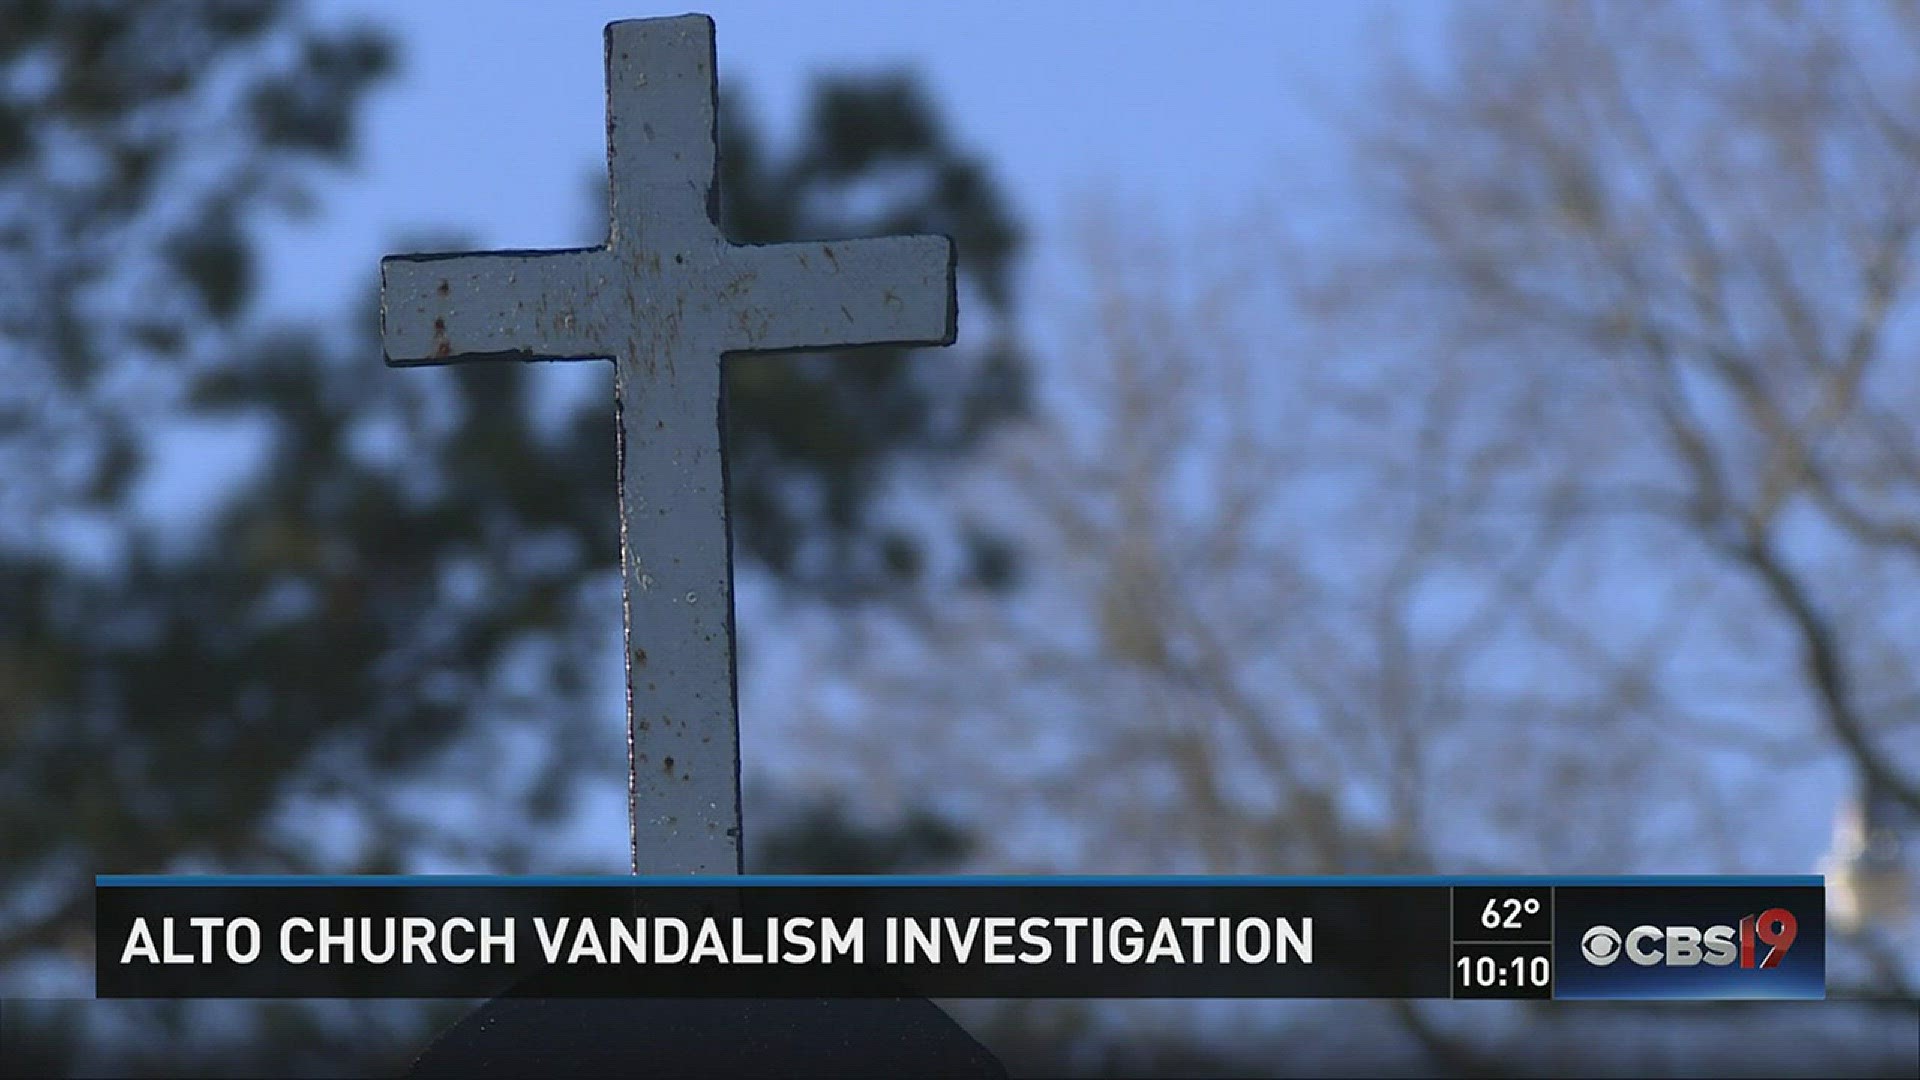 Cherokee county sheriff's office is looking into a vandalism case at an Historical Black church, but the church says it's a hate crime